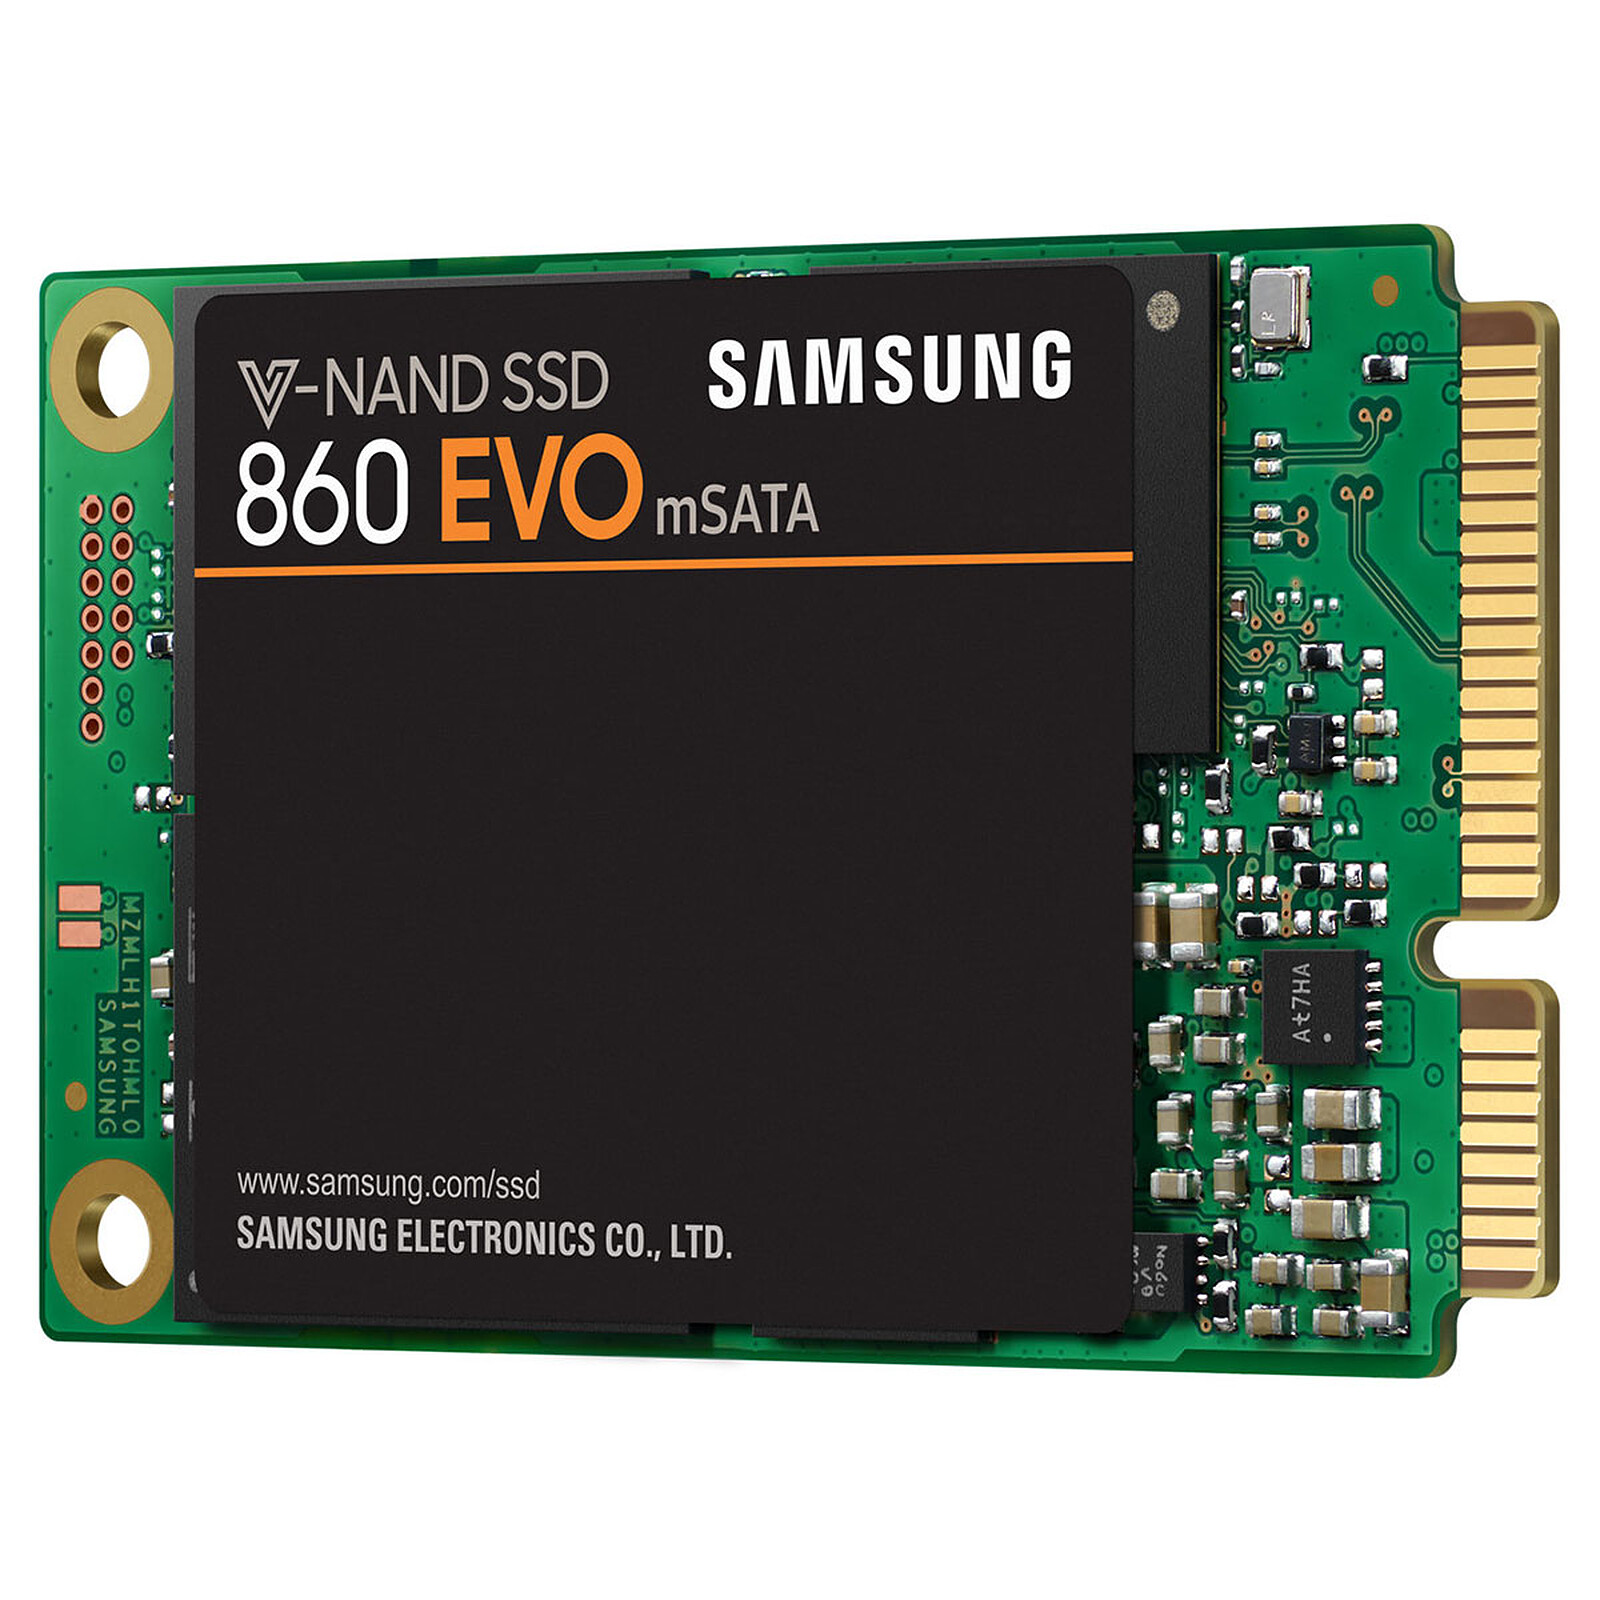 Samsung SSD 990 PRO M.2 PCIe NVMe 1 To - Disque SSD - LDLC